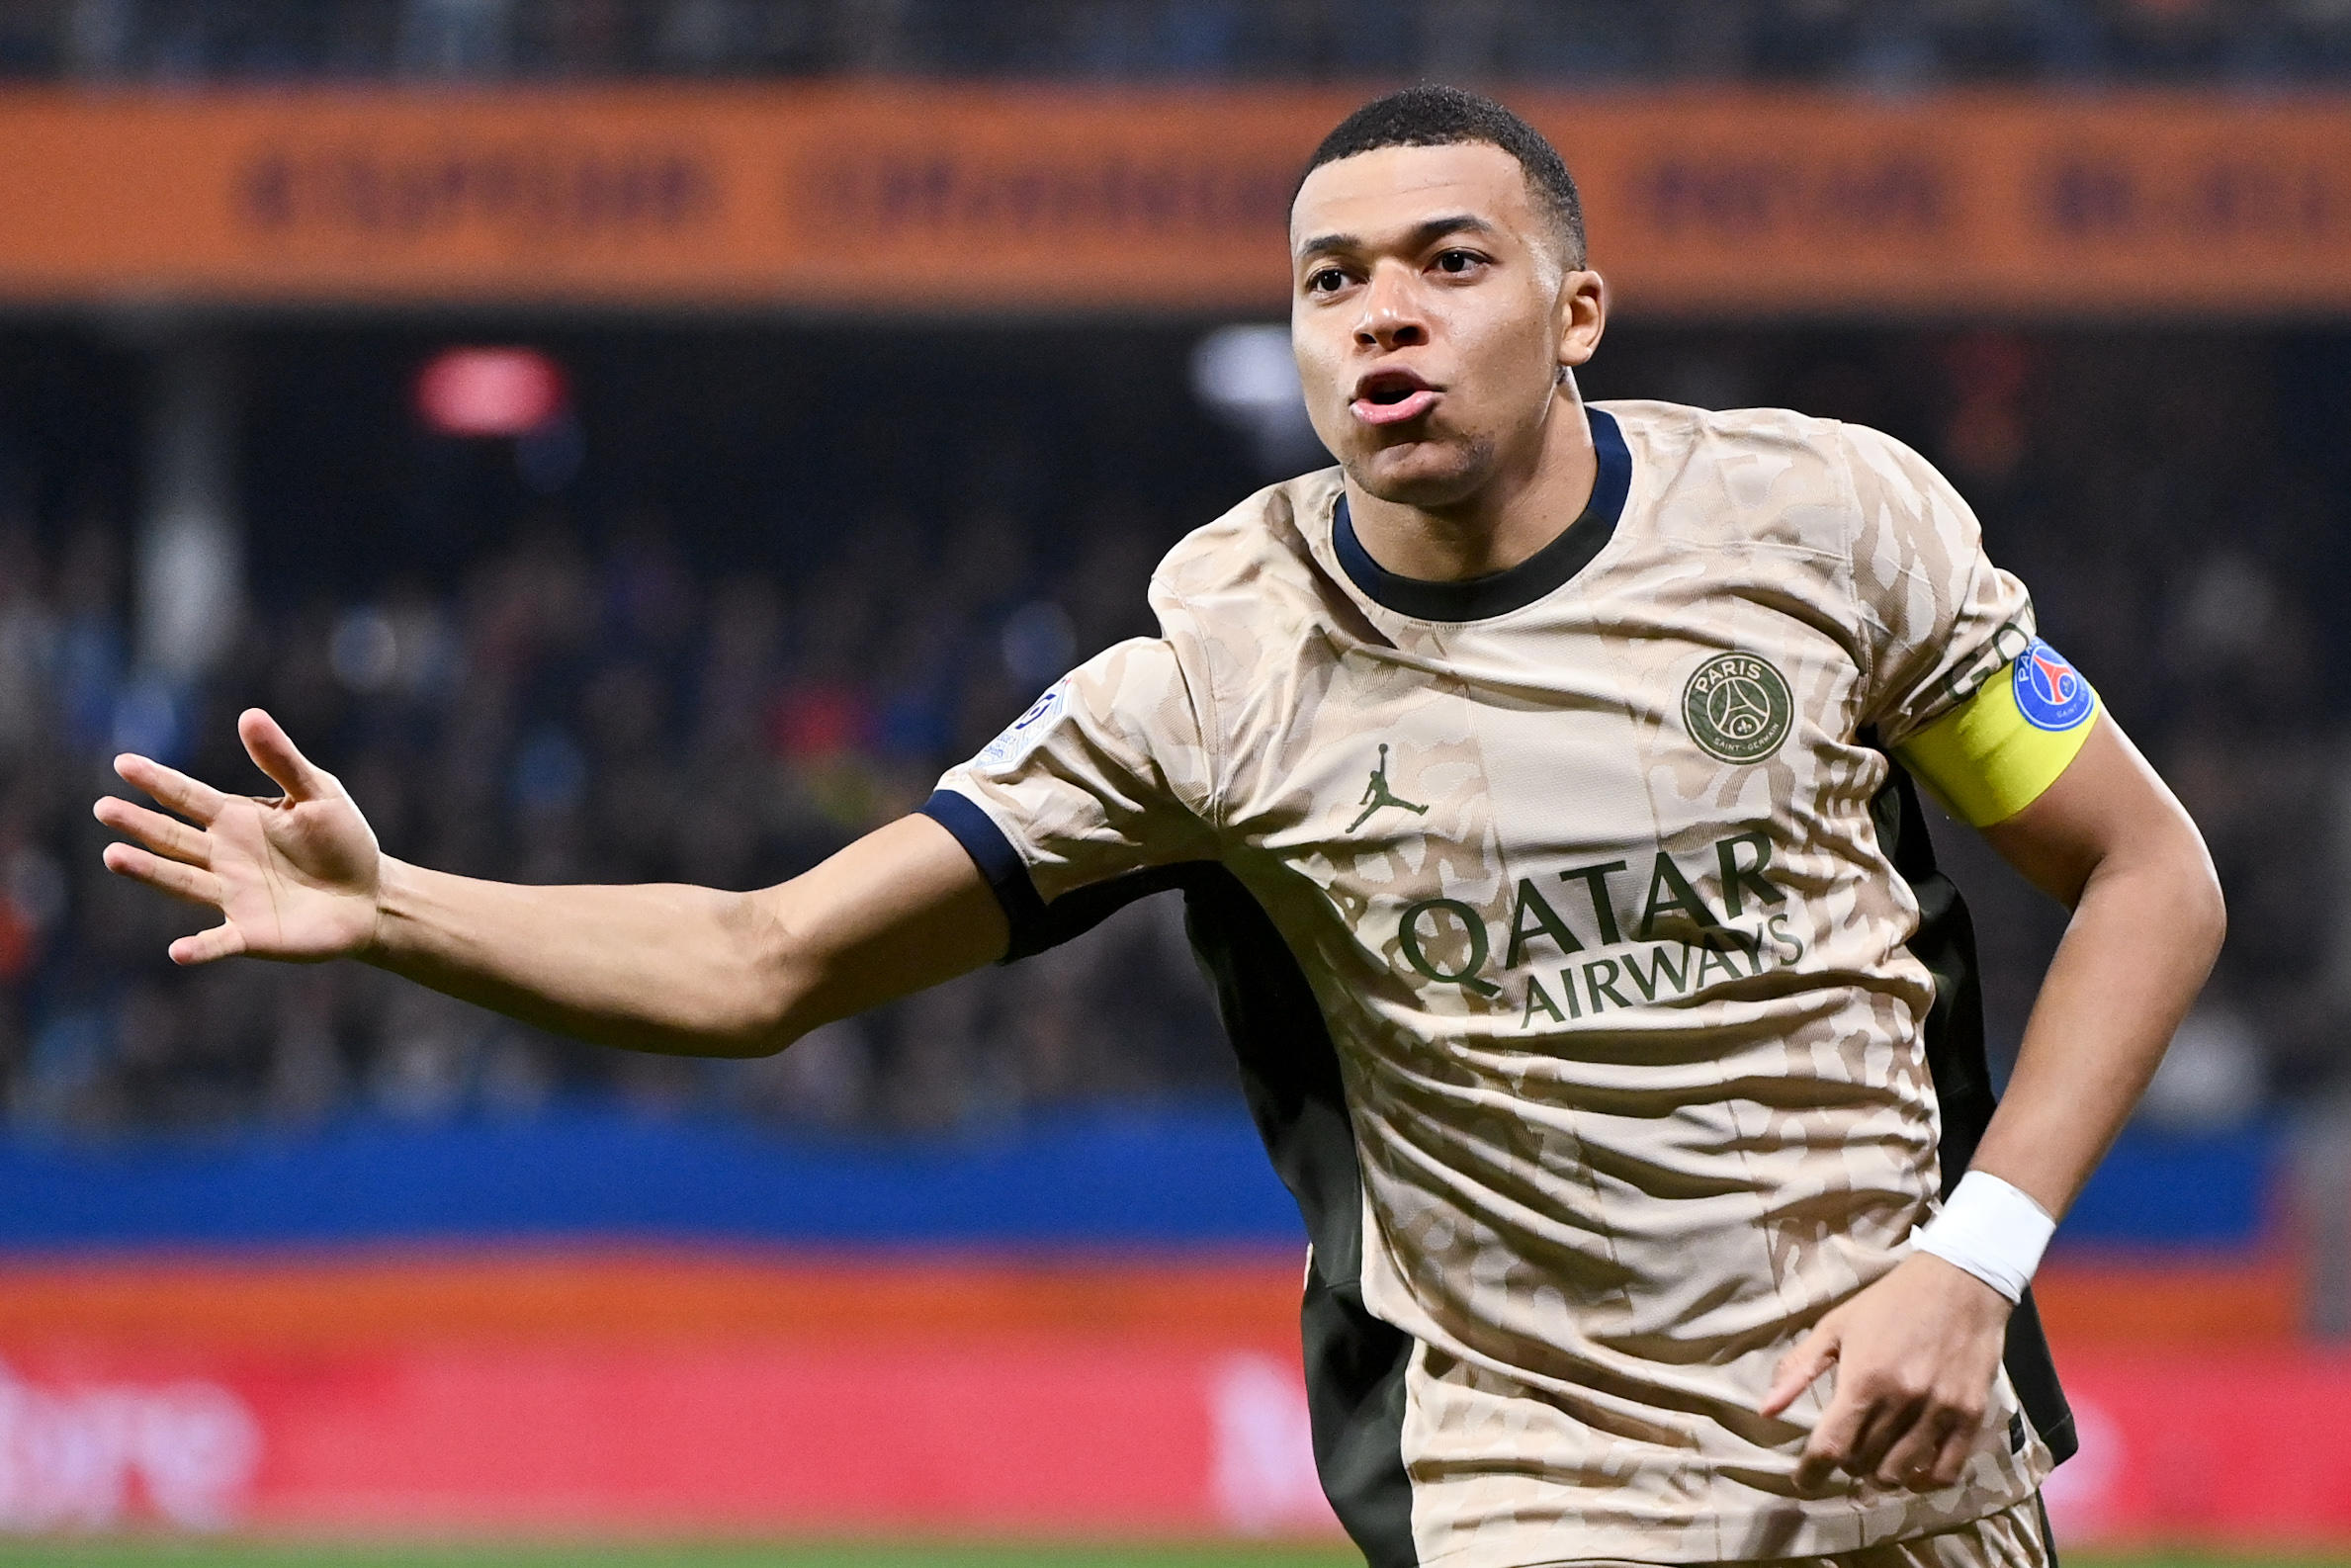 Latest Developments In Mbappe's Transfer To Real Madrid